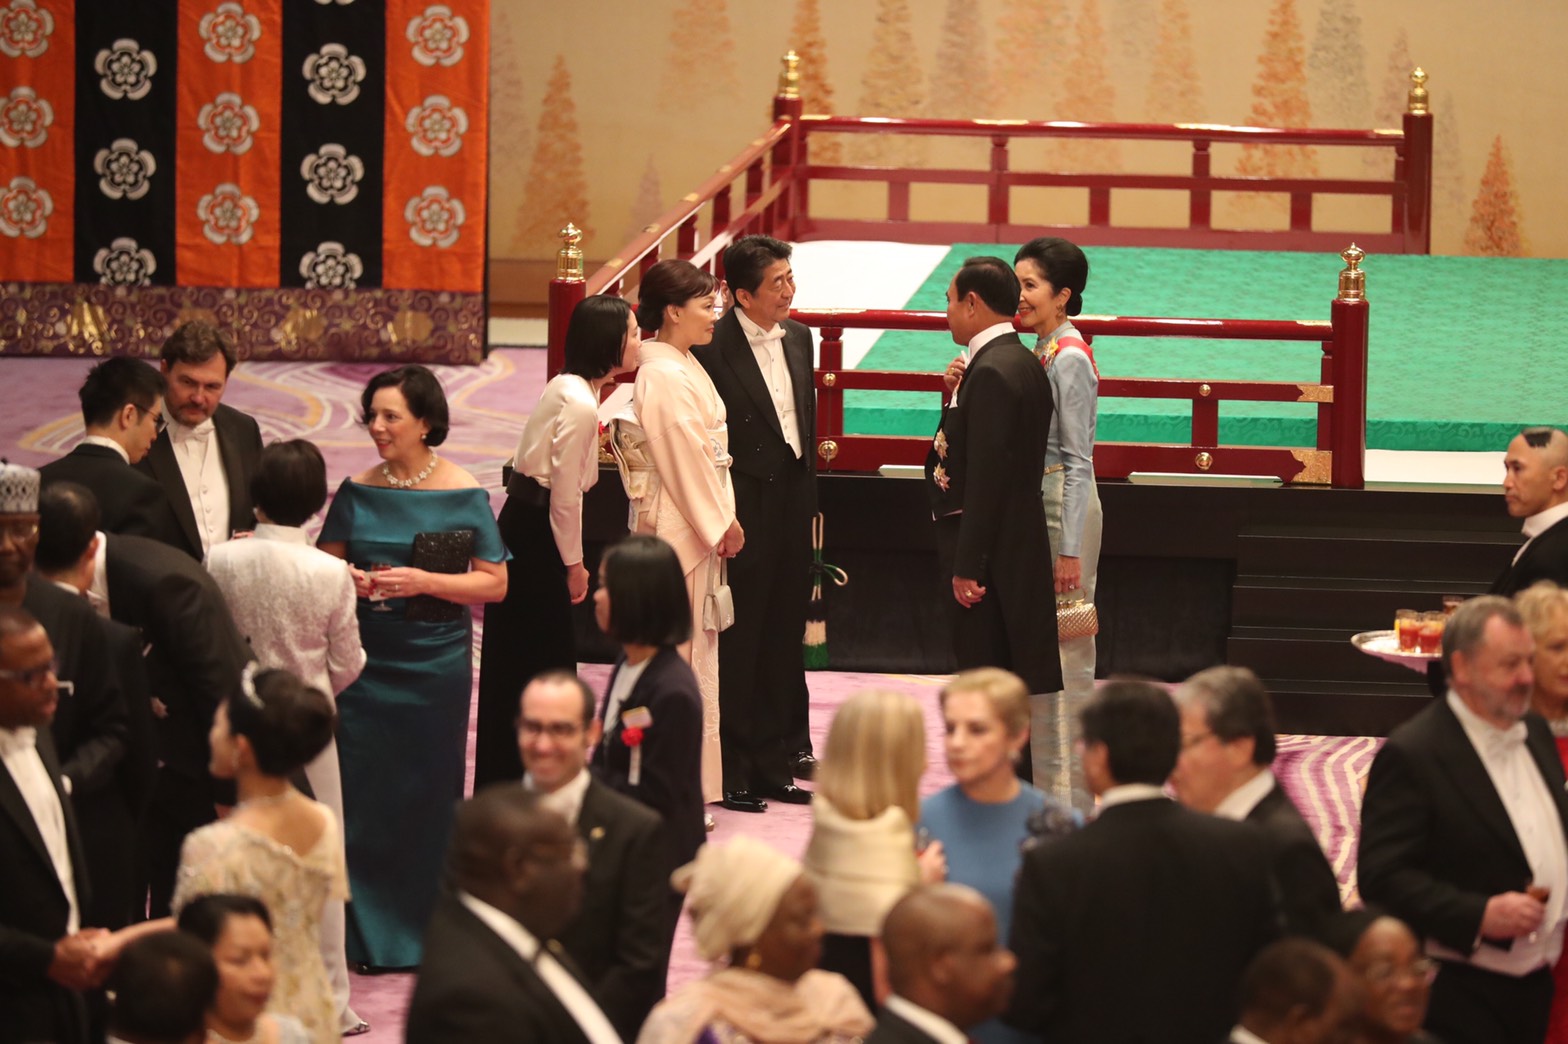 Naruhito's enthronement